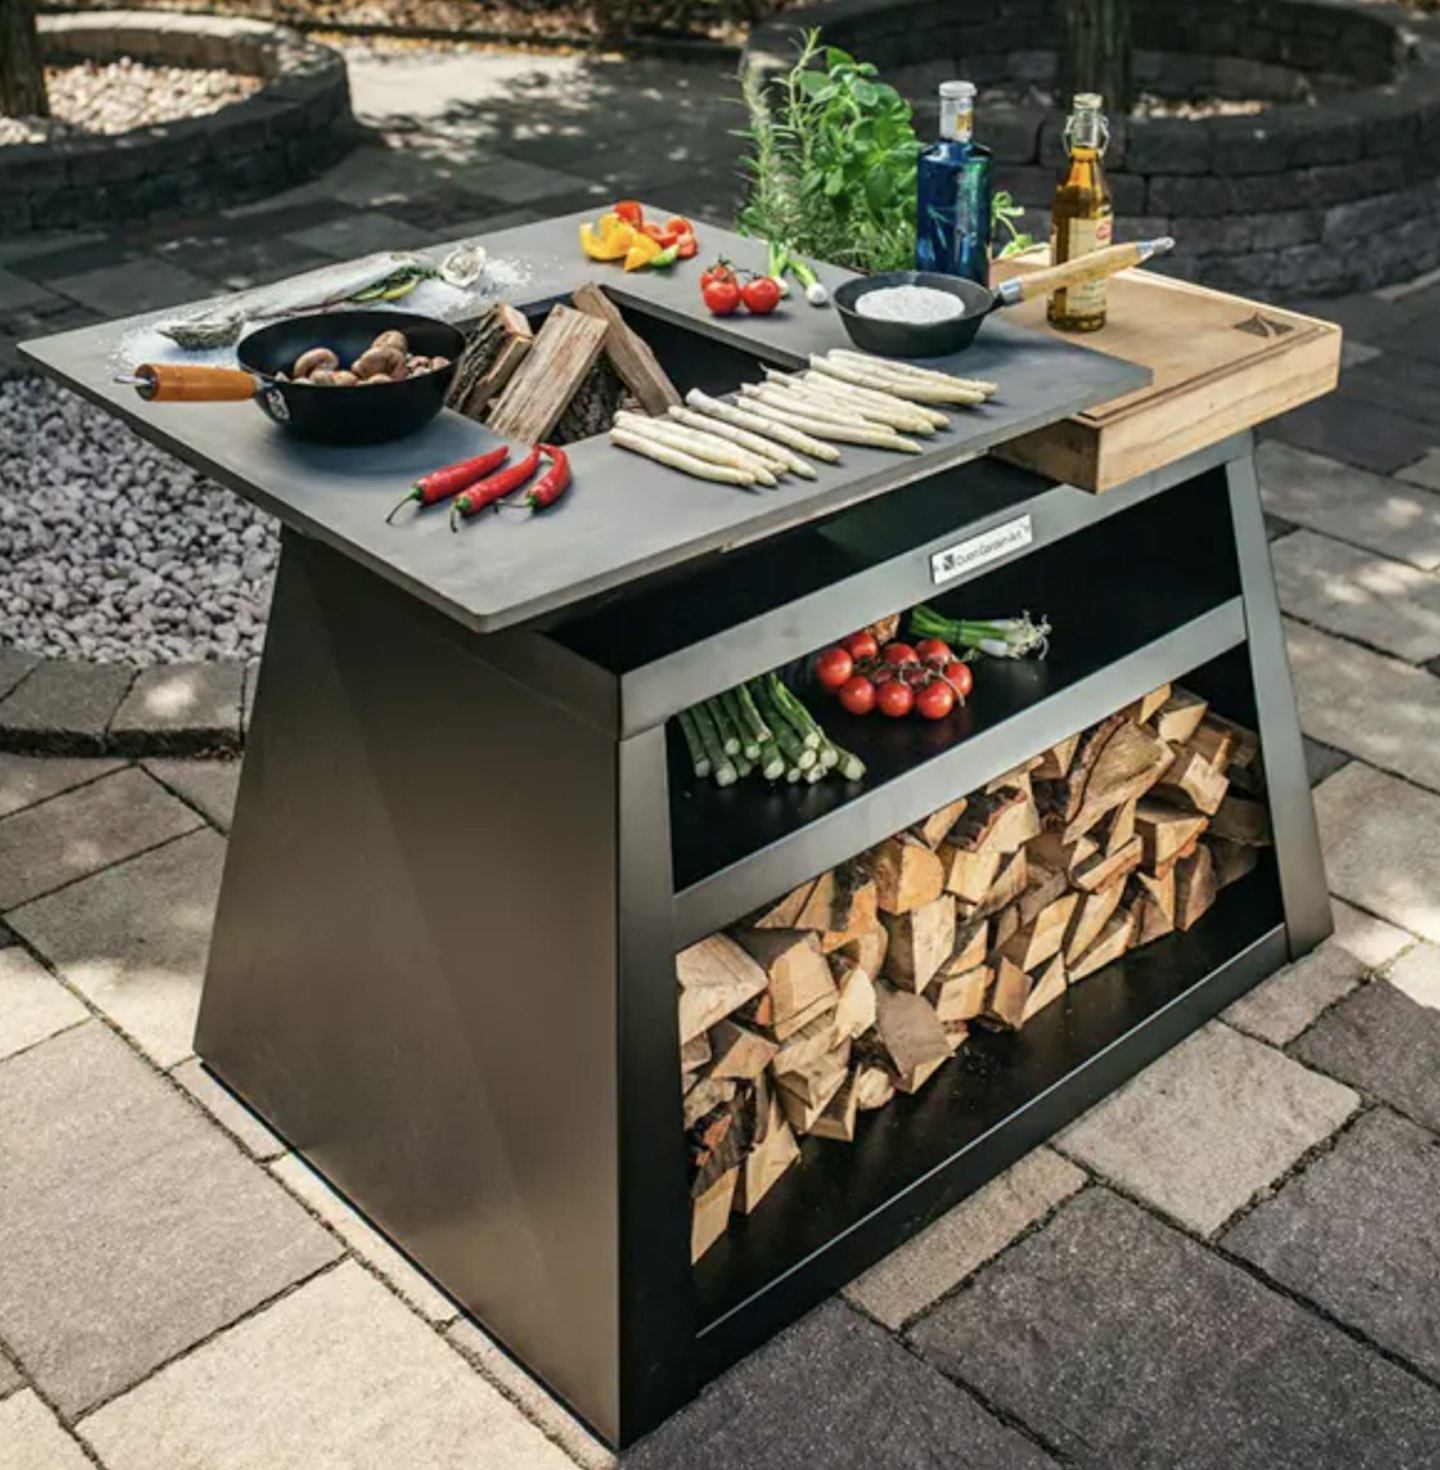 Quan Wood Fired BBQ Island with 800 x 800 x 10mm hot plate, in Carbon